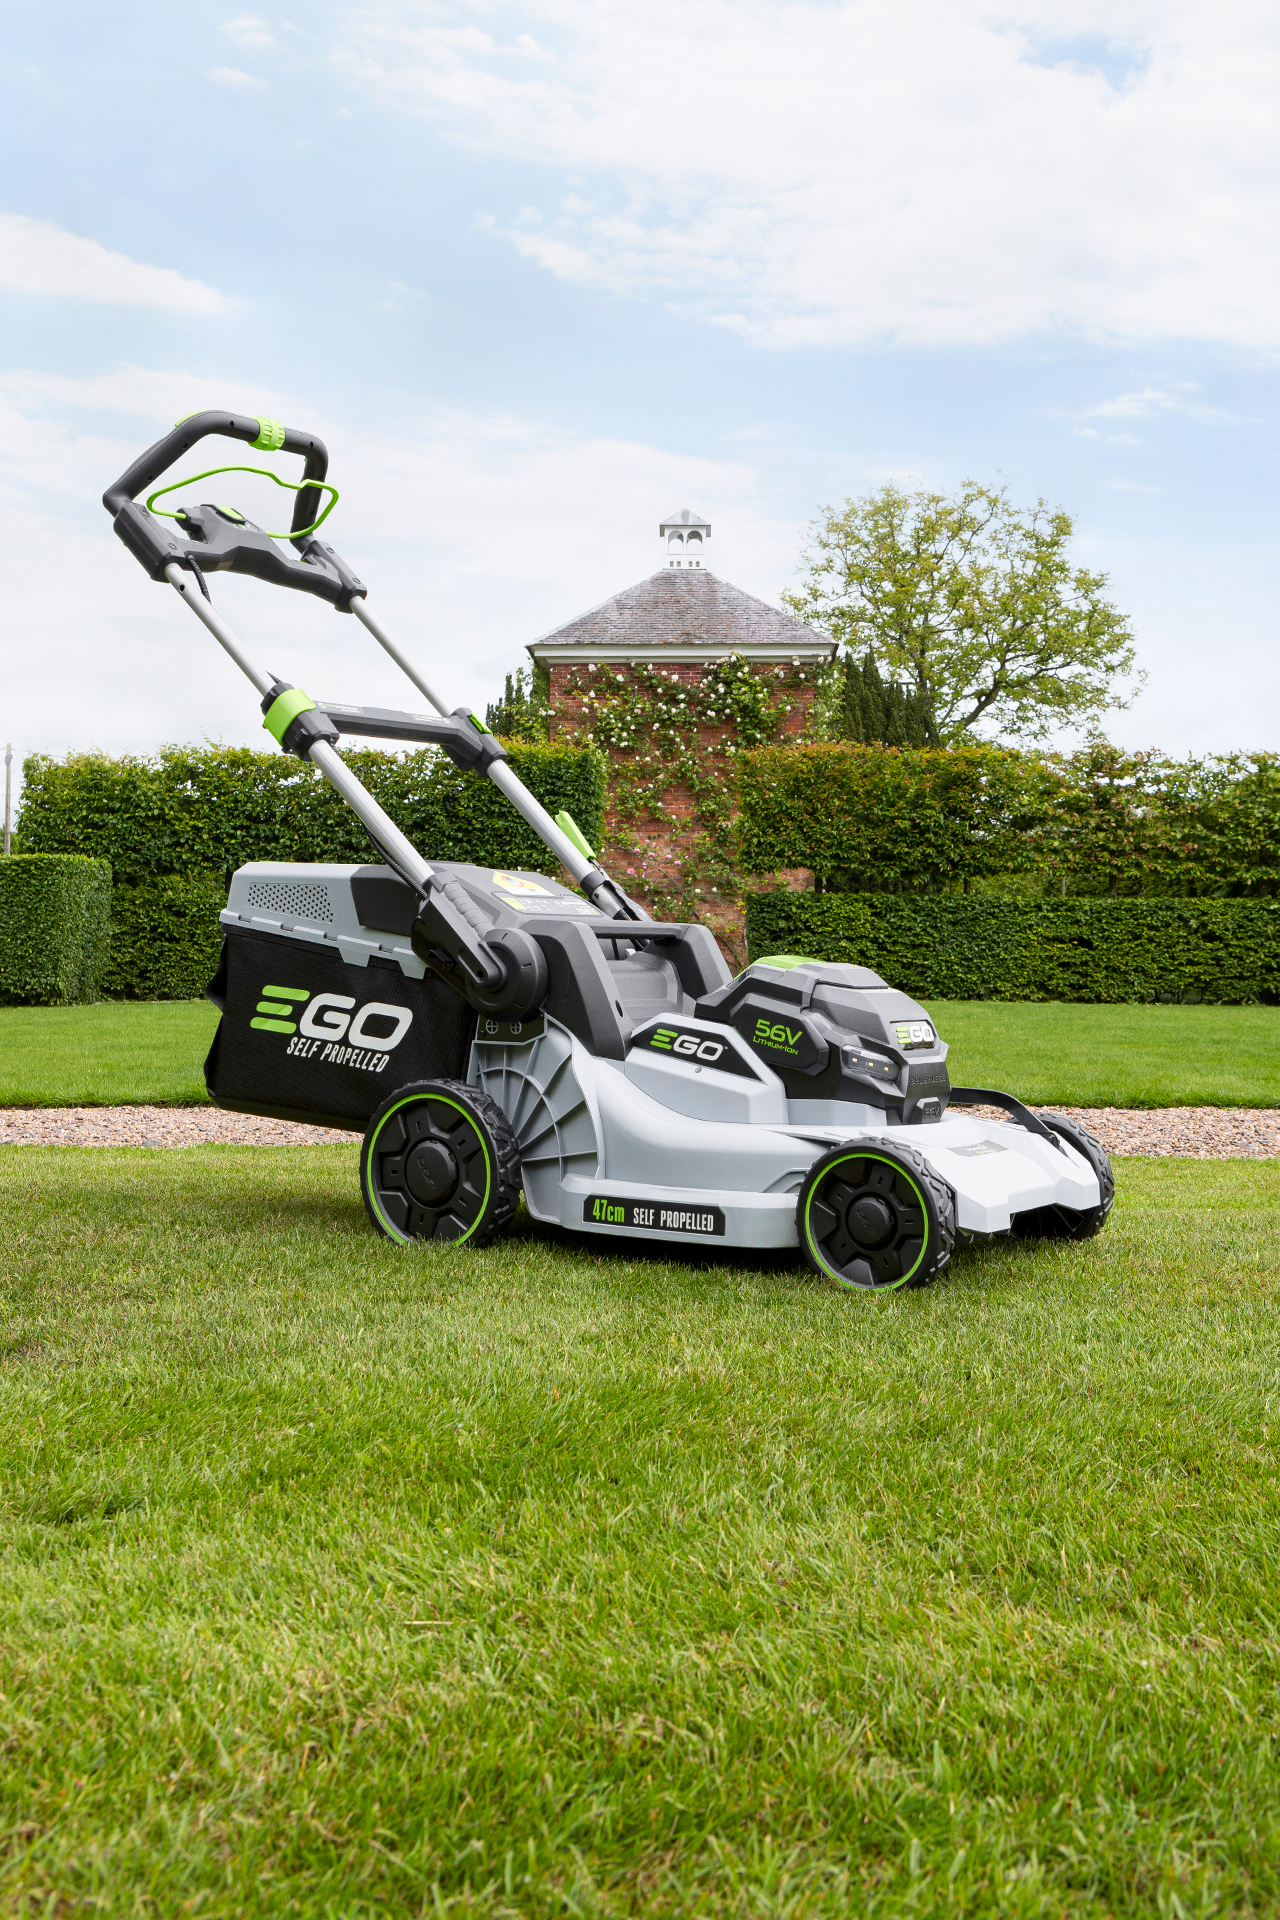 product photography of a lawnmower for ego gardening tools